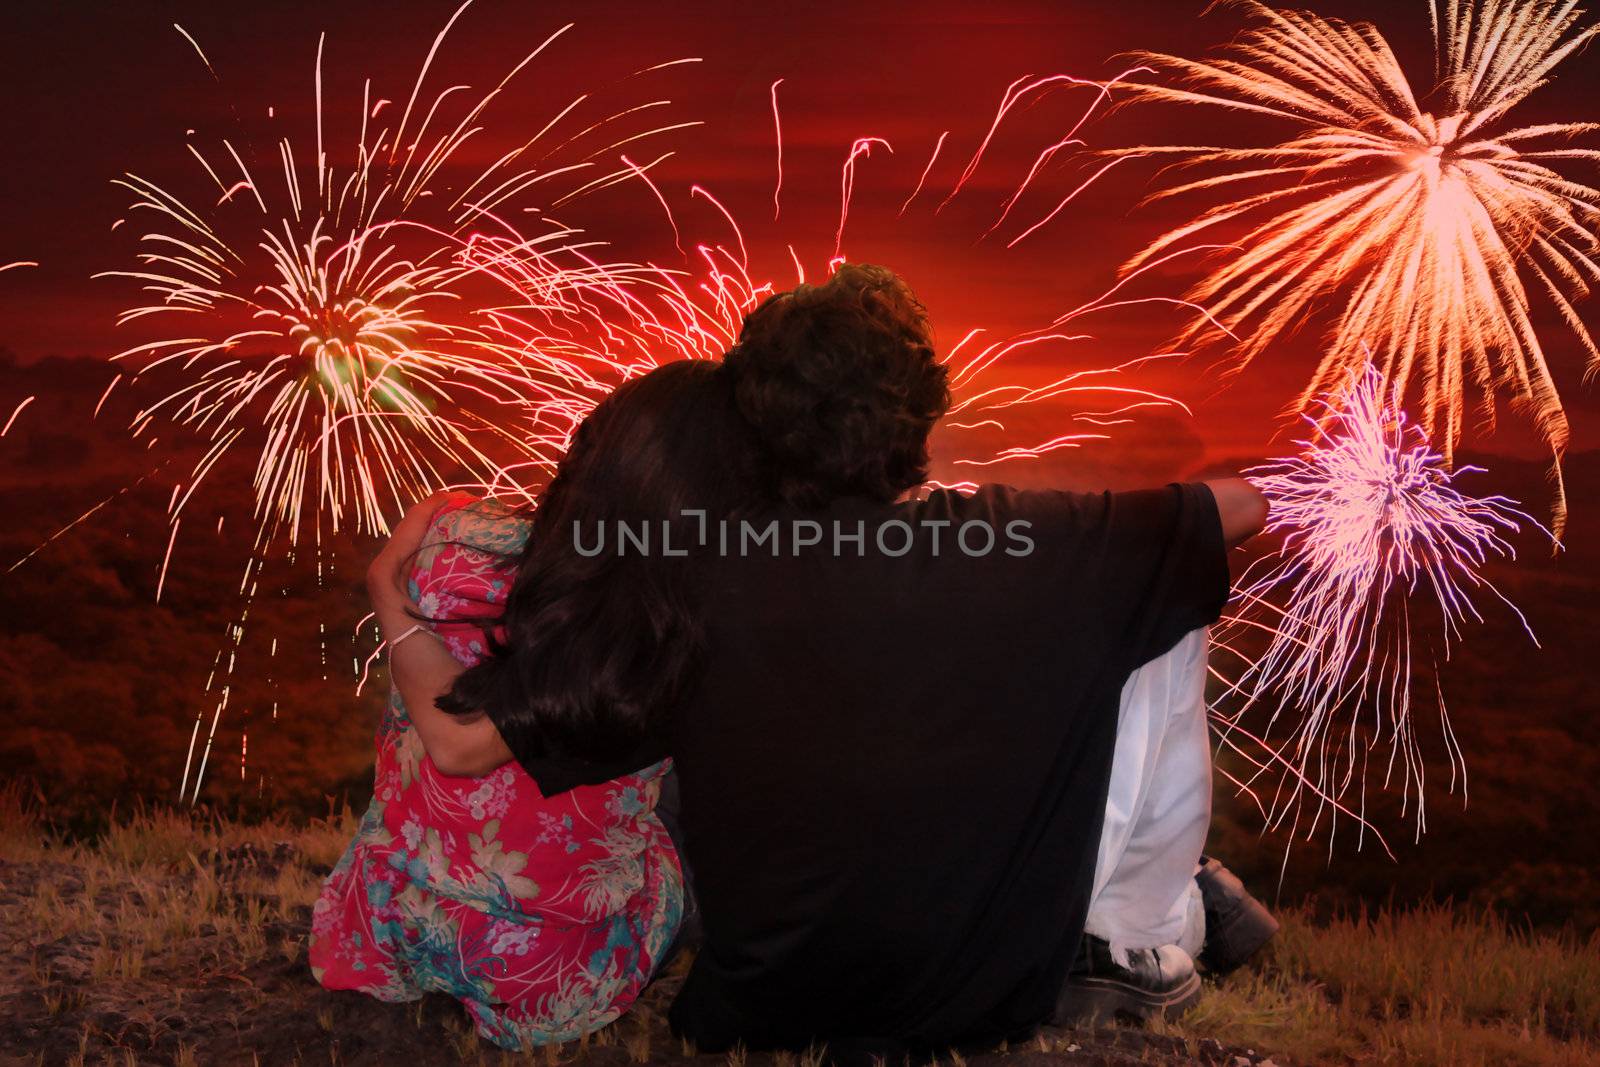 A romantic Indian couple watching traditional fireworks at dusk during the festive occassion of Diwali in India